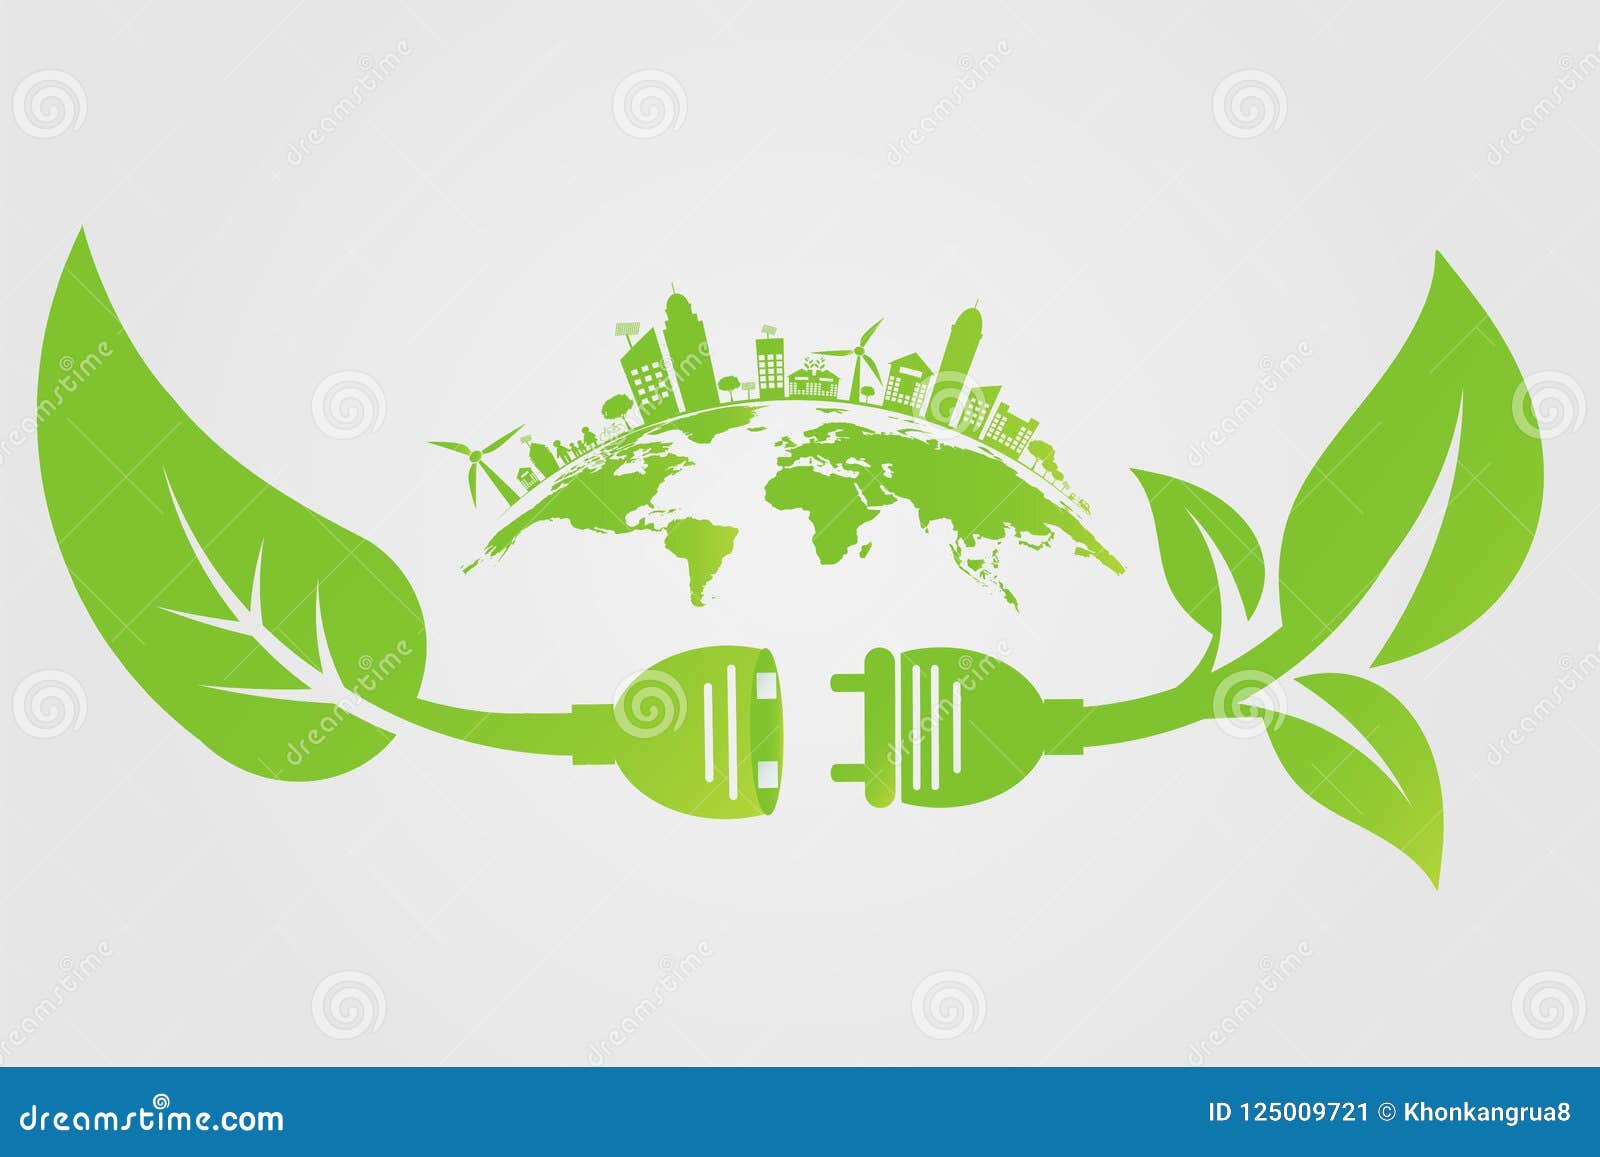 power ecology plug green cities help the world with eco-friendly concept ideas.